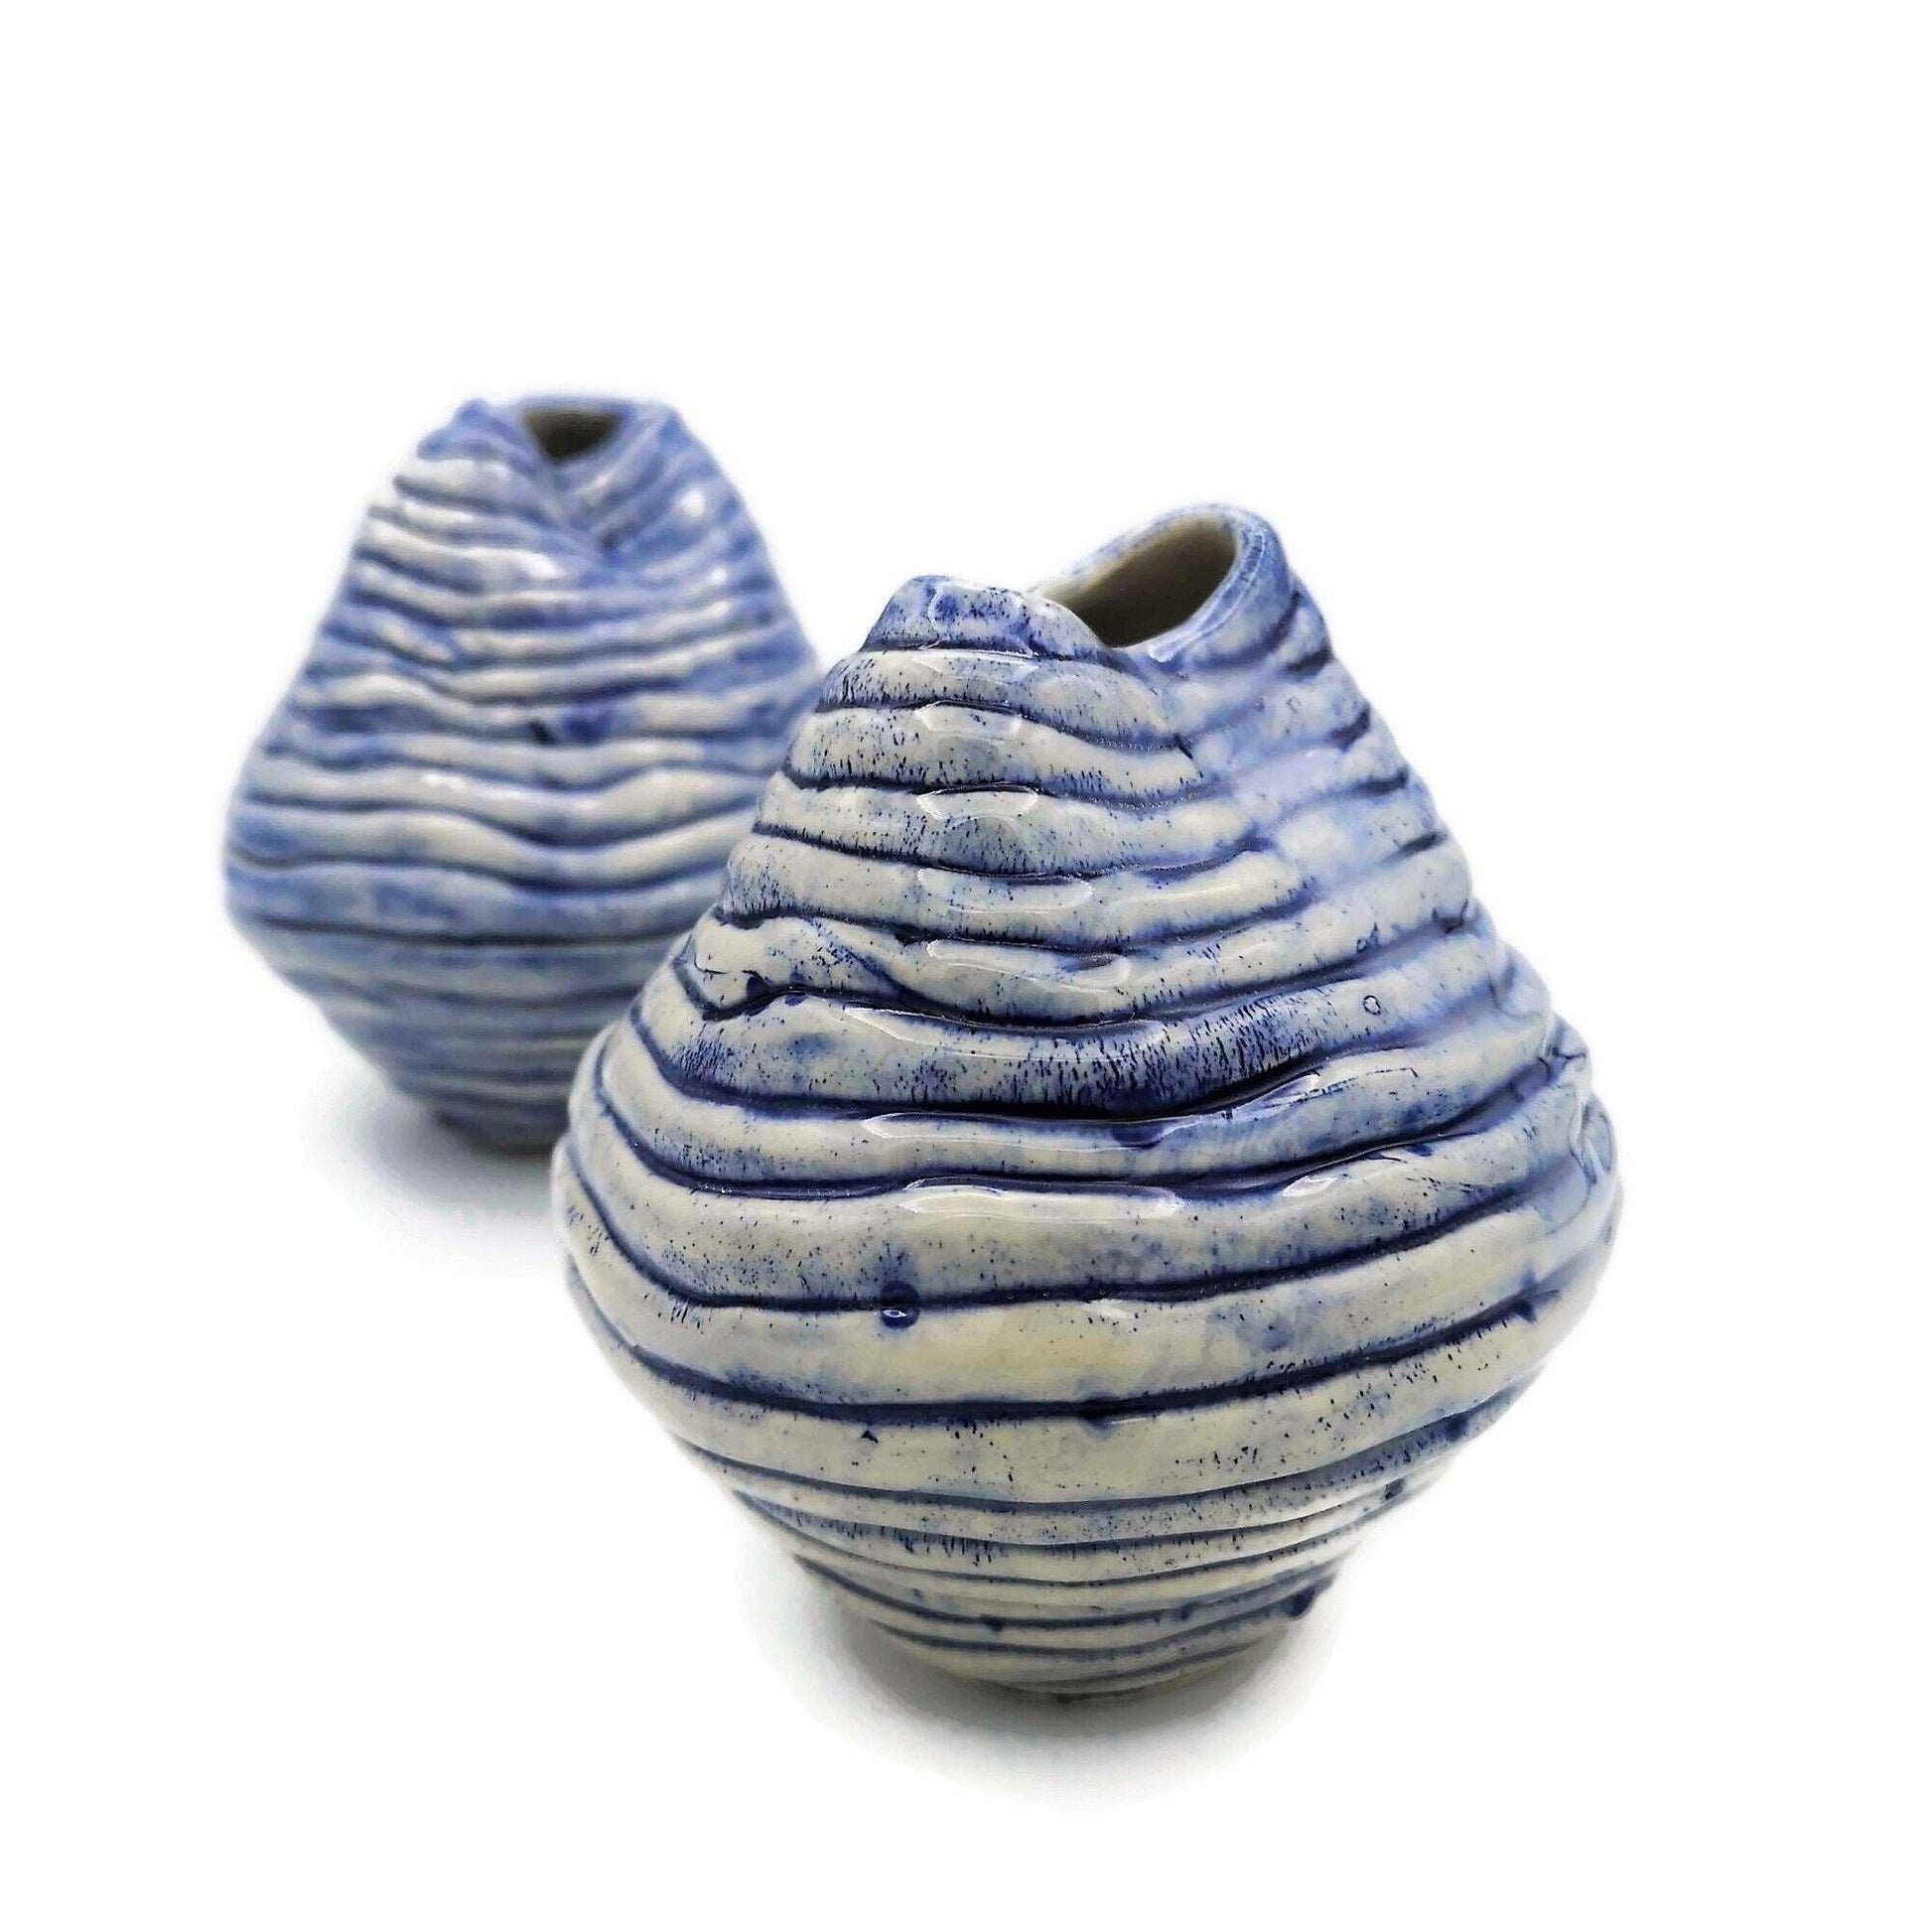 1pc Blue Handmade Ceramic Small Vase Irregular Shaped Pottery Abstract Sculpture Ceramic Vessel Best Sellers Mom Birthday Gift From Daughter